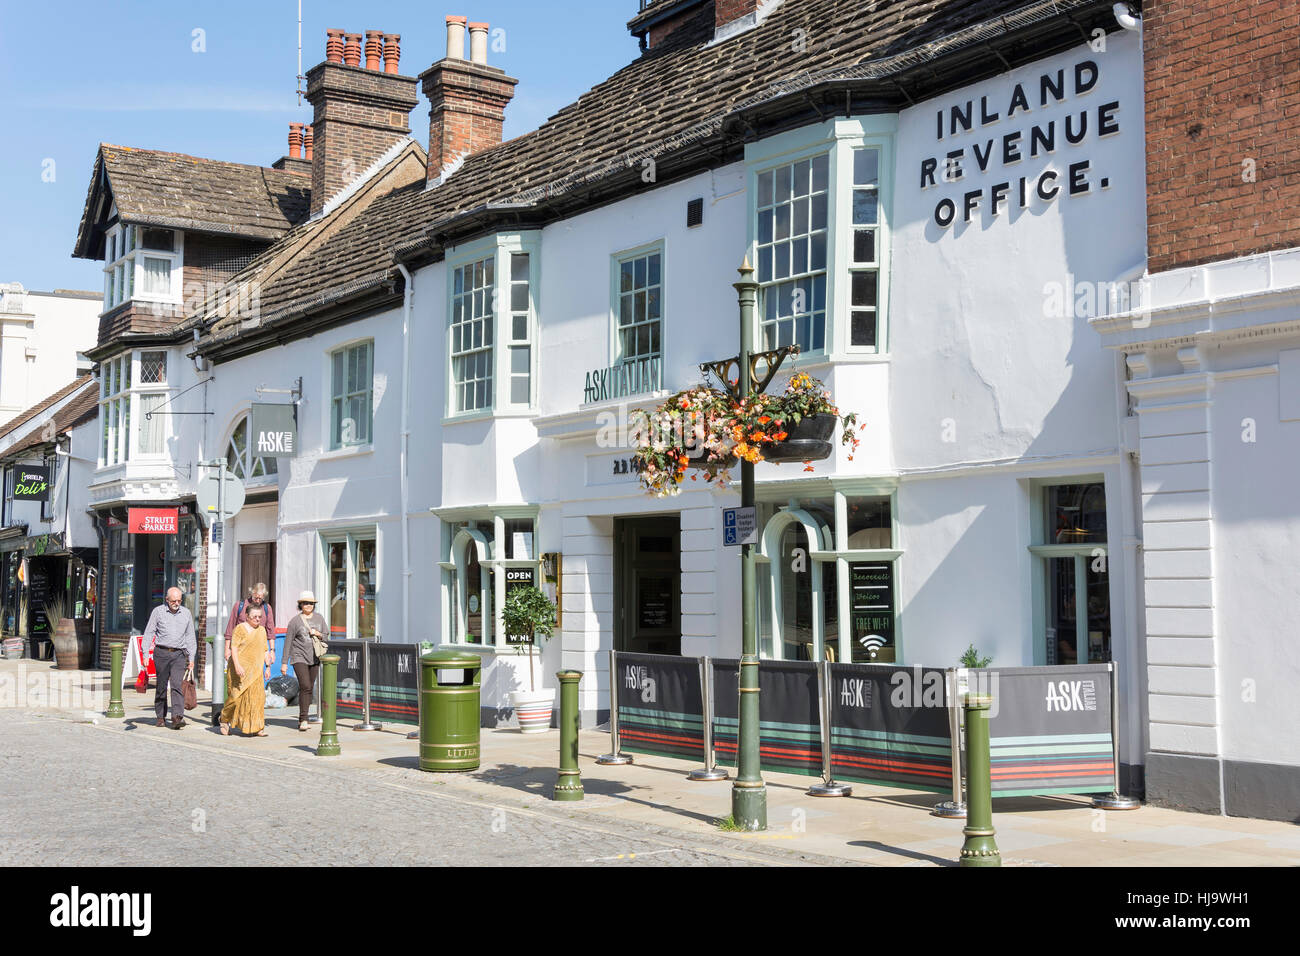 Ask Restaurant in former 15th century Olde Kings Head Hotel, Carfax, Horsham, West Sussex, England, United Kingdom Stock Photo